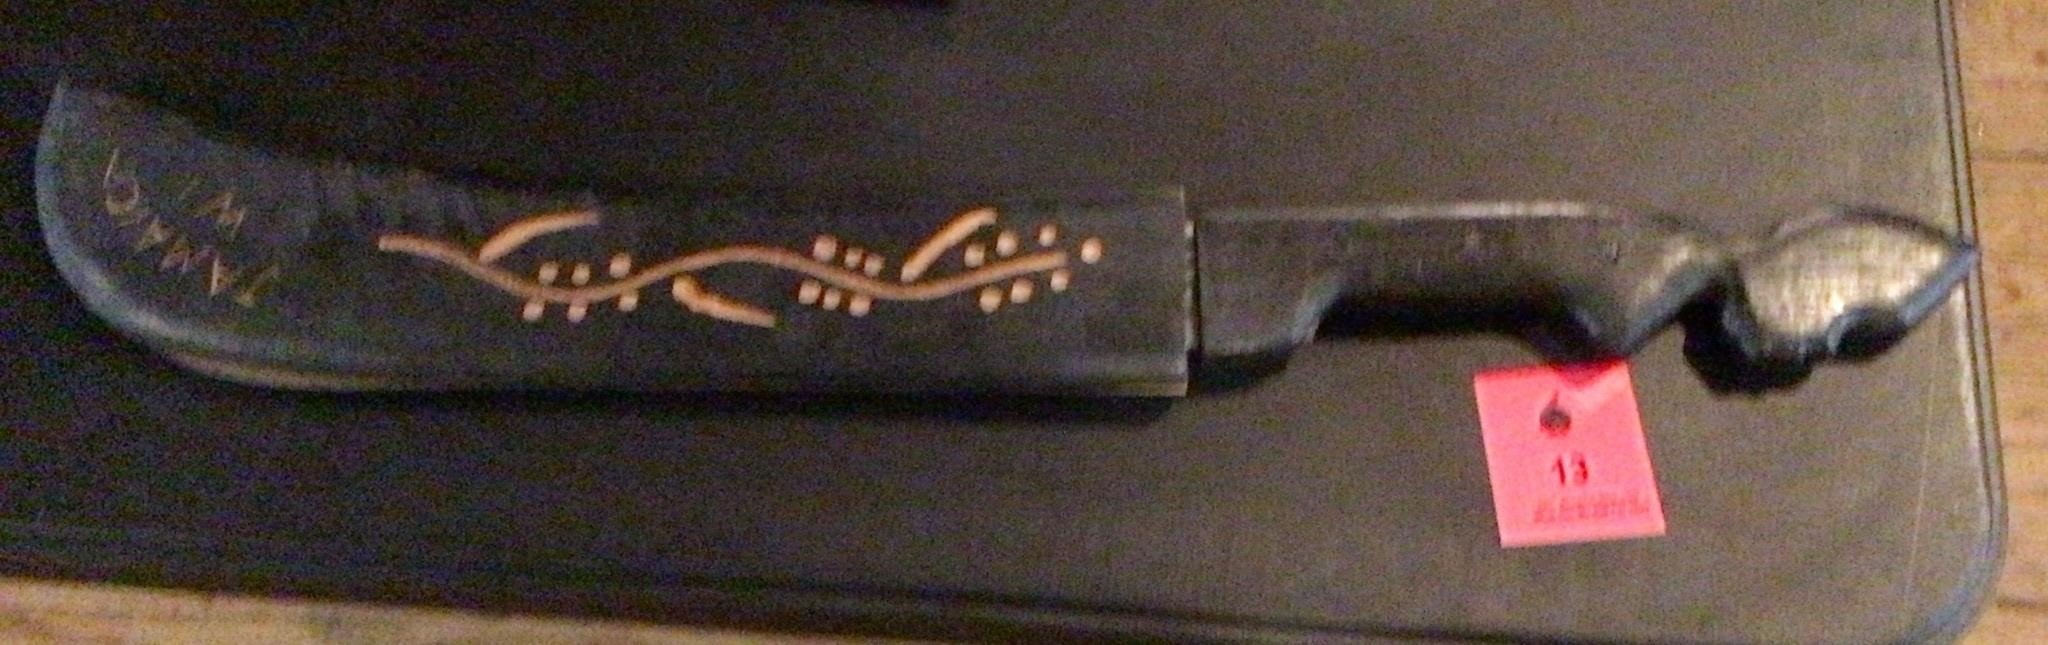 Large Knife with Engraved Blade cover Jamaica